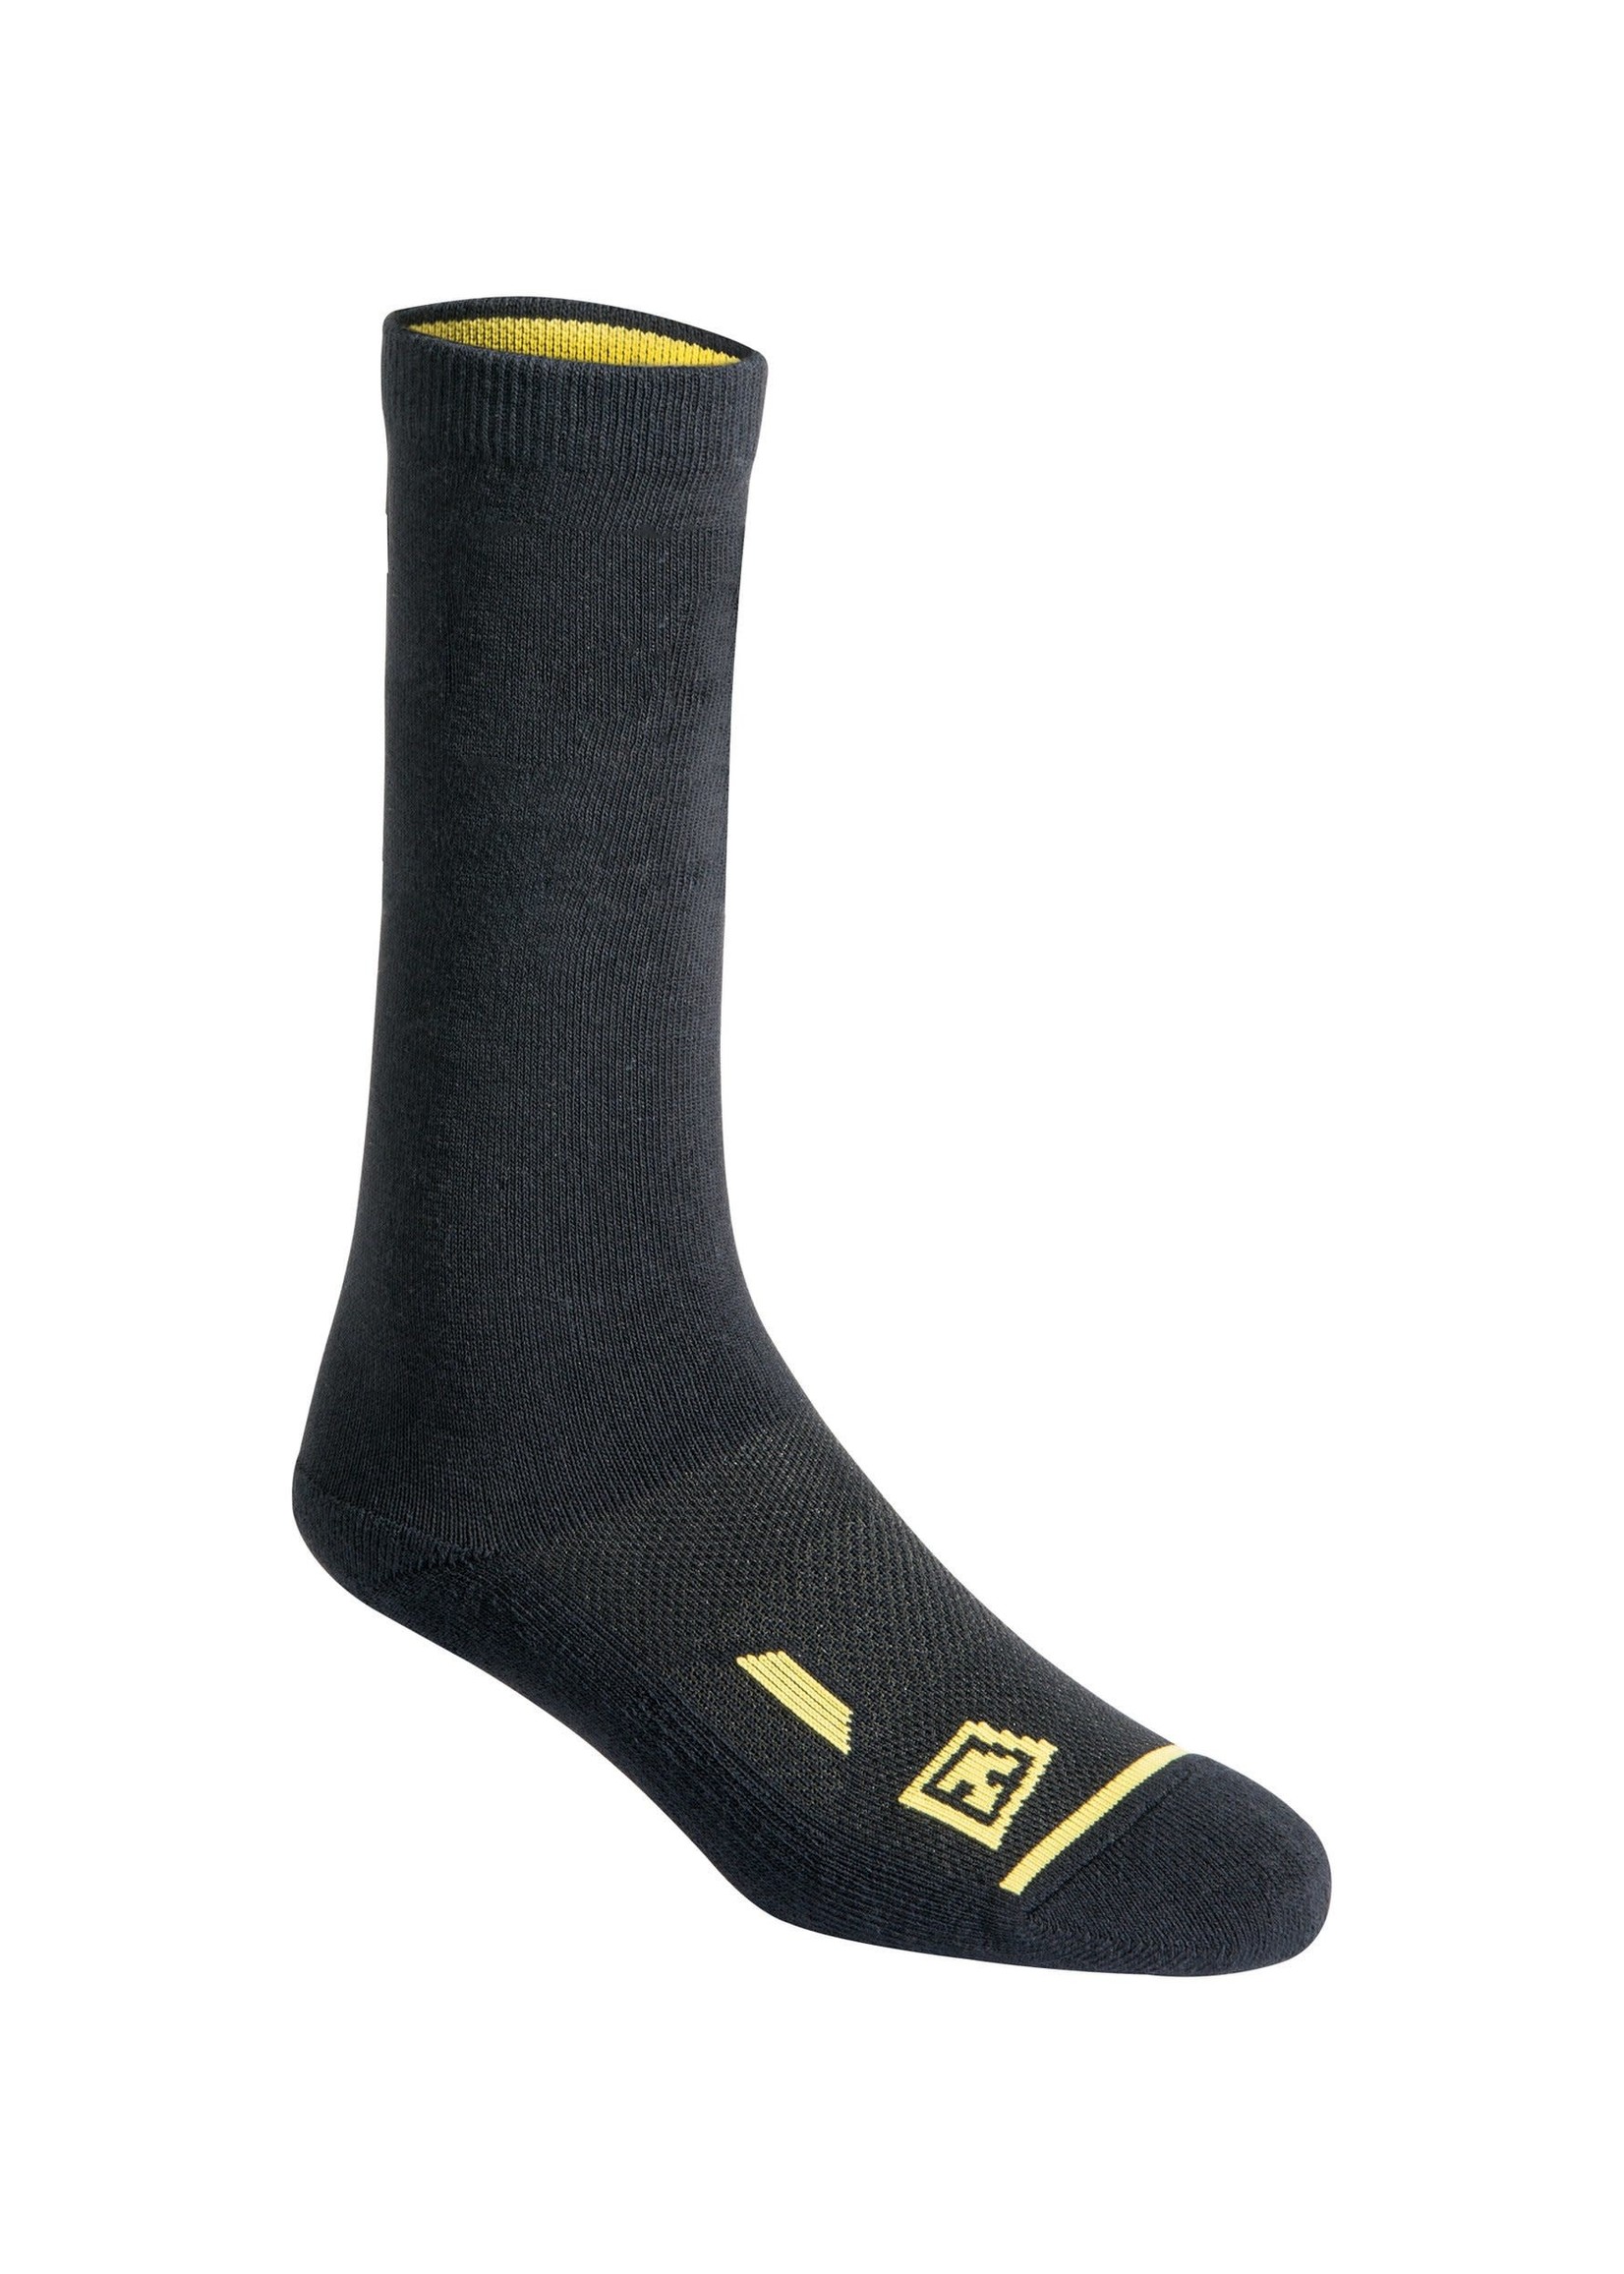 First Tactical First Tactical Cotton Duty Socks Black 3-Pack 6"